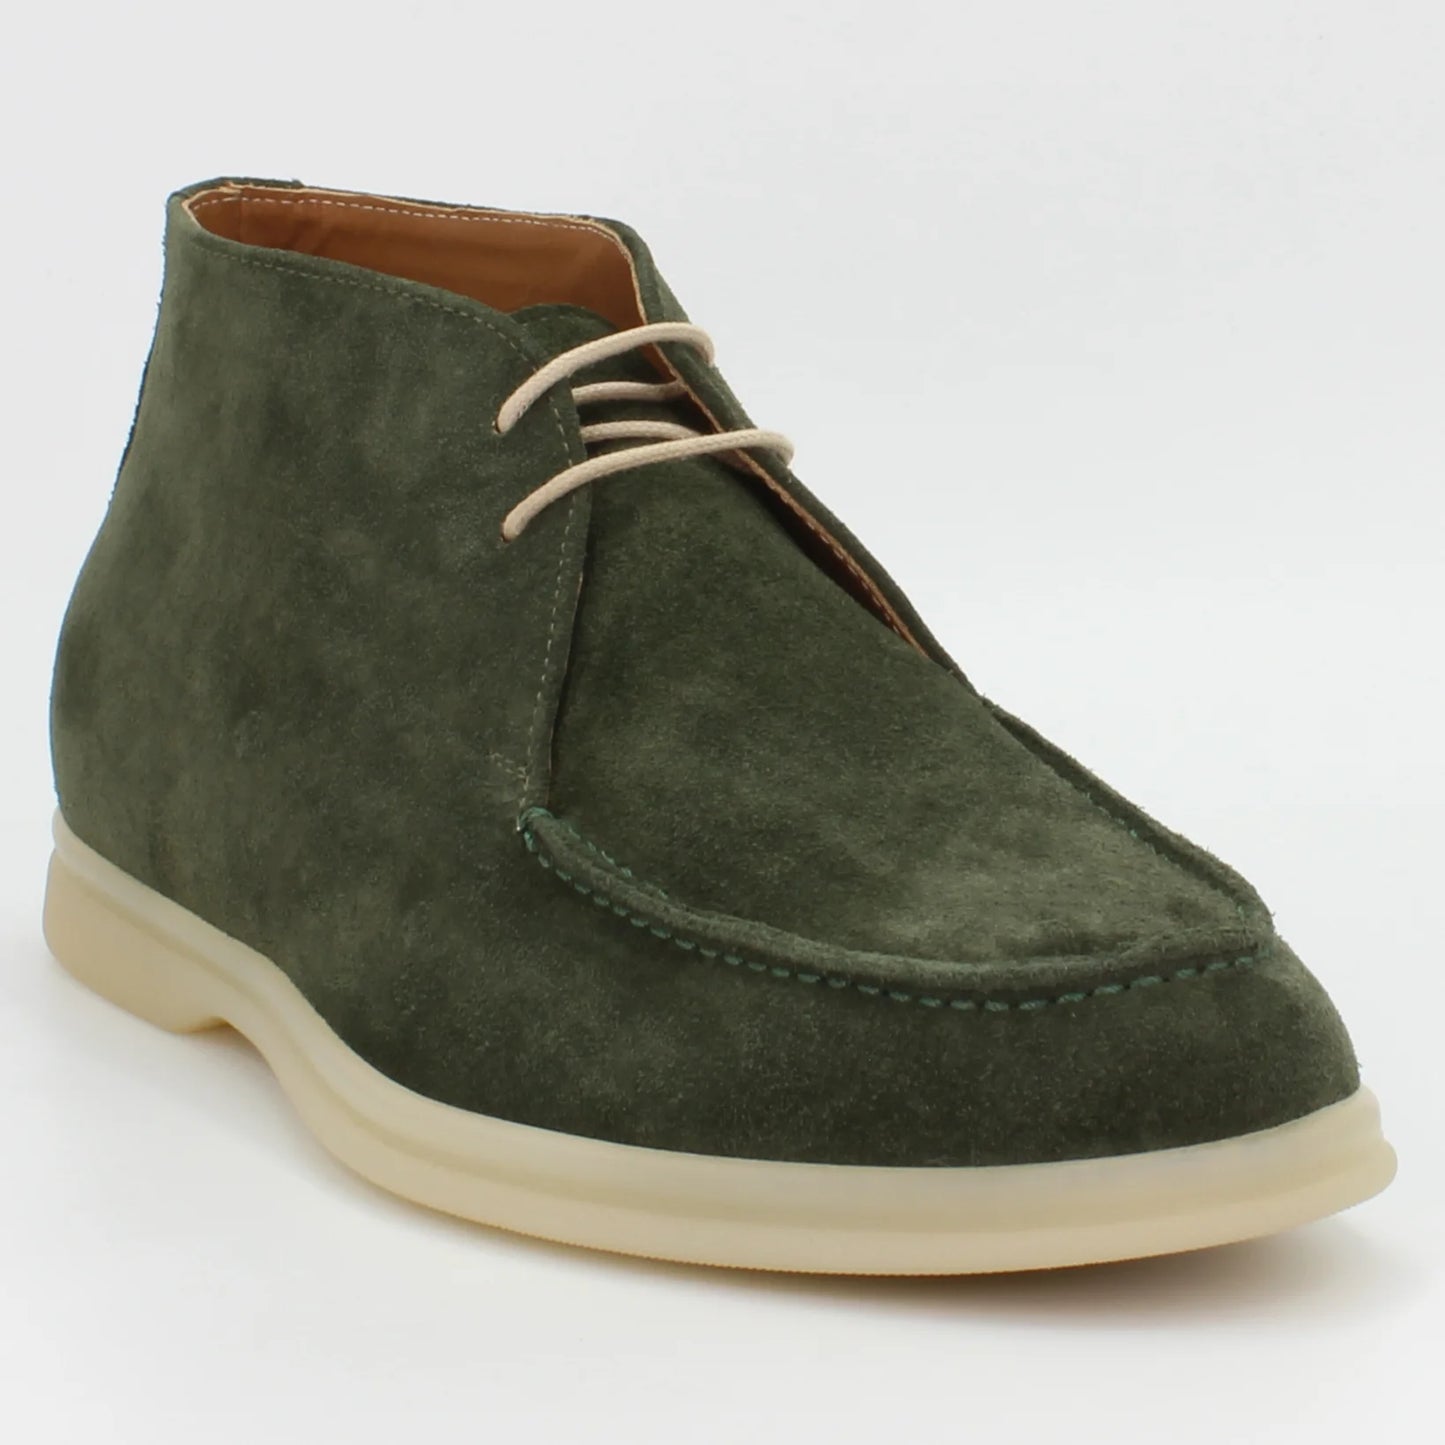 Shop Handmade Italian Leather suede chukka boot in verde (BEED05)  or browse our range of hand-made Italian shoes for men in leather or suede in-store at Aliverti Cape Town, or shop online. We deliver in South Africa & offer multiple payment plans as well as accept multiple safe & secure payment methods.